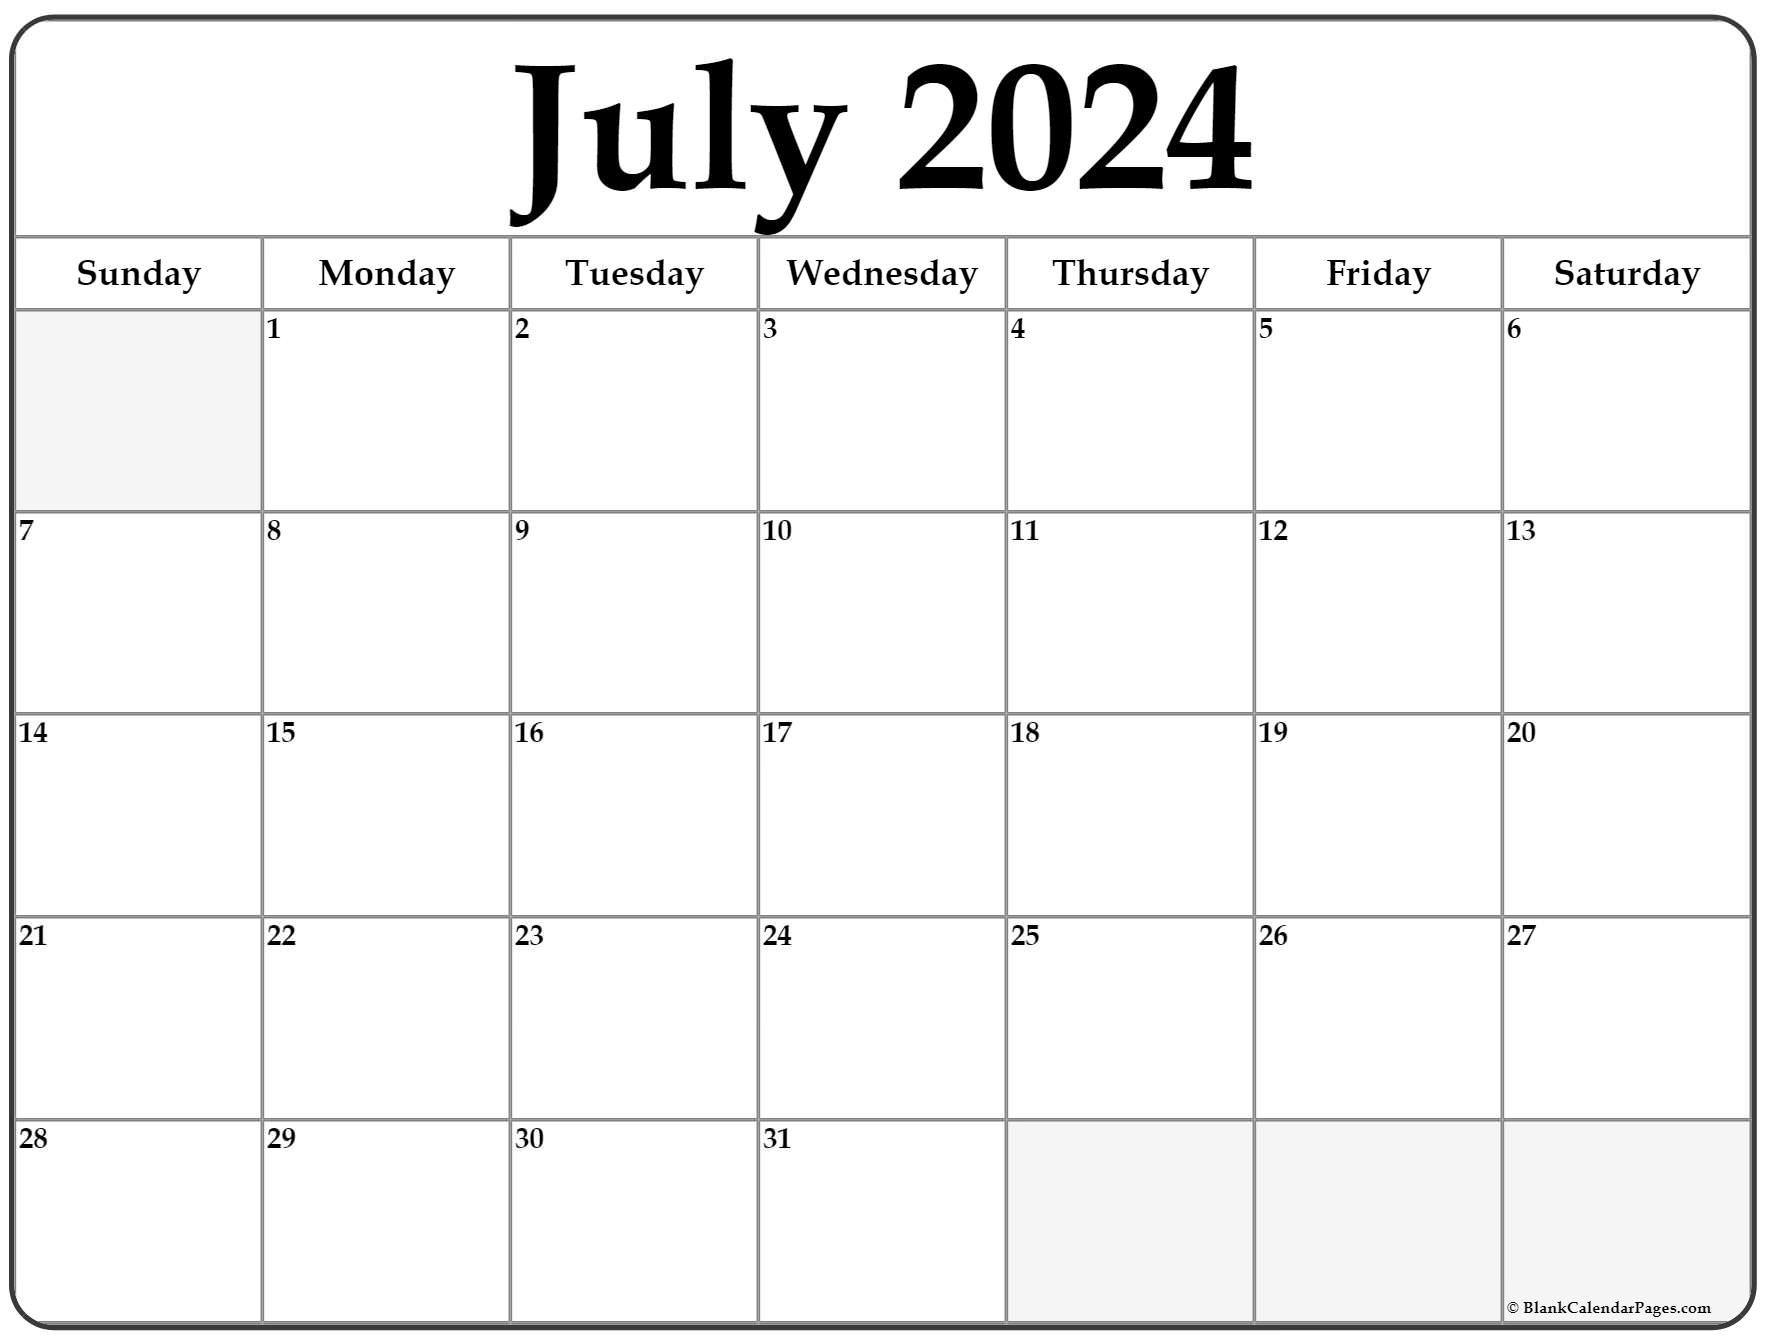 How Many Days Since July 21st 2024 Cherin Lorianne